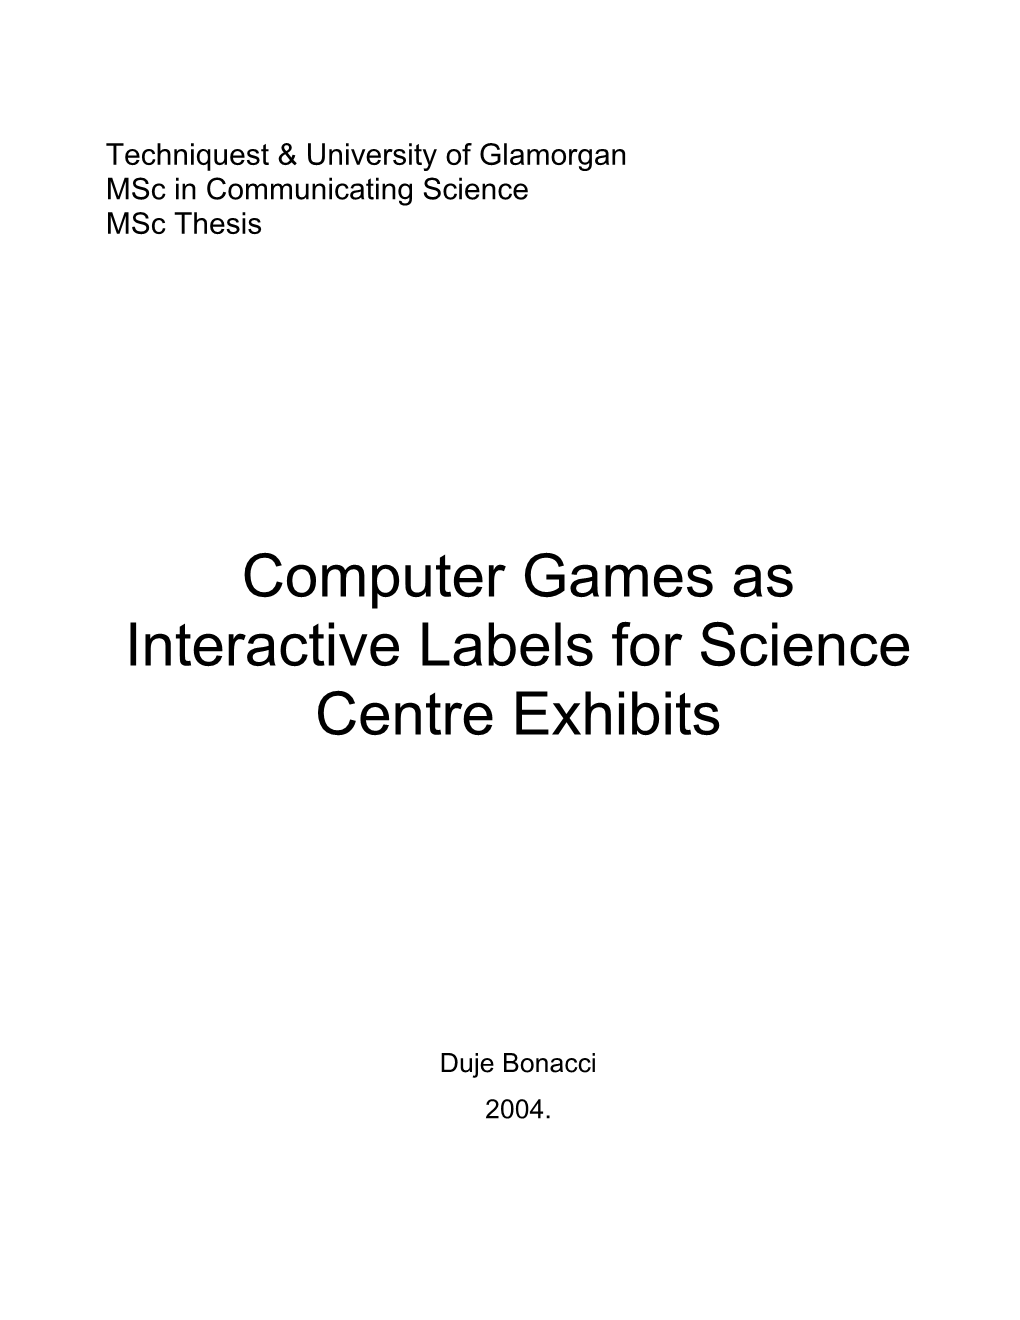 Computer Games As Interactive Labels for Science Centre Exhibits